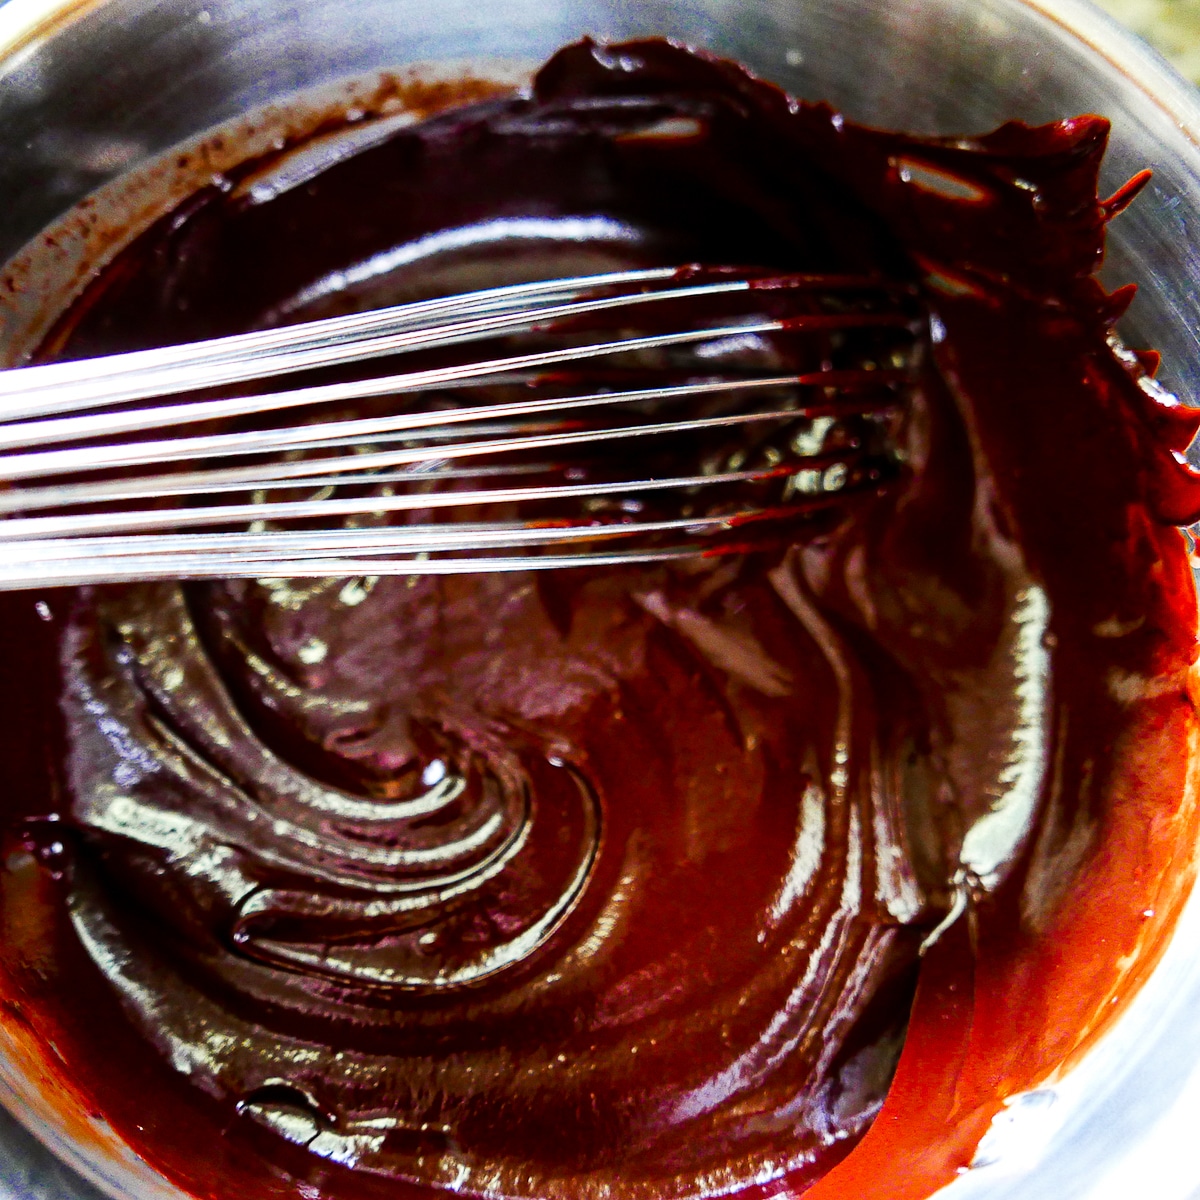 chocolate ganache being whisked in a mixing bowl.